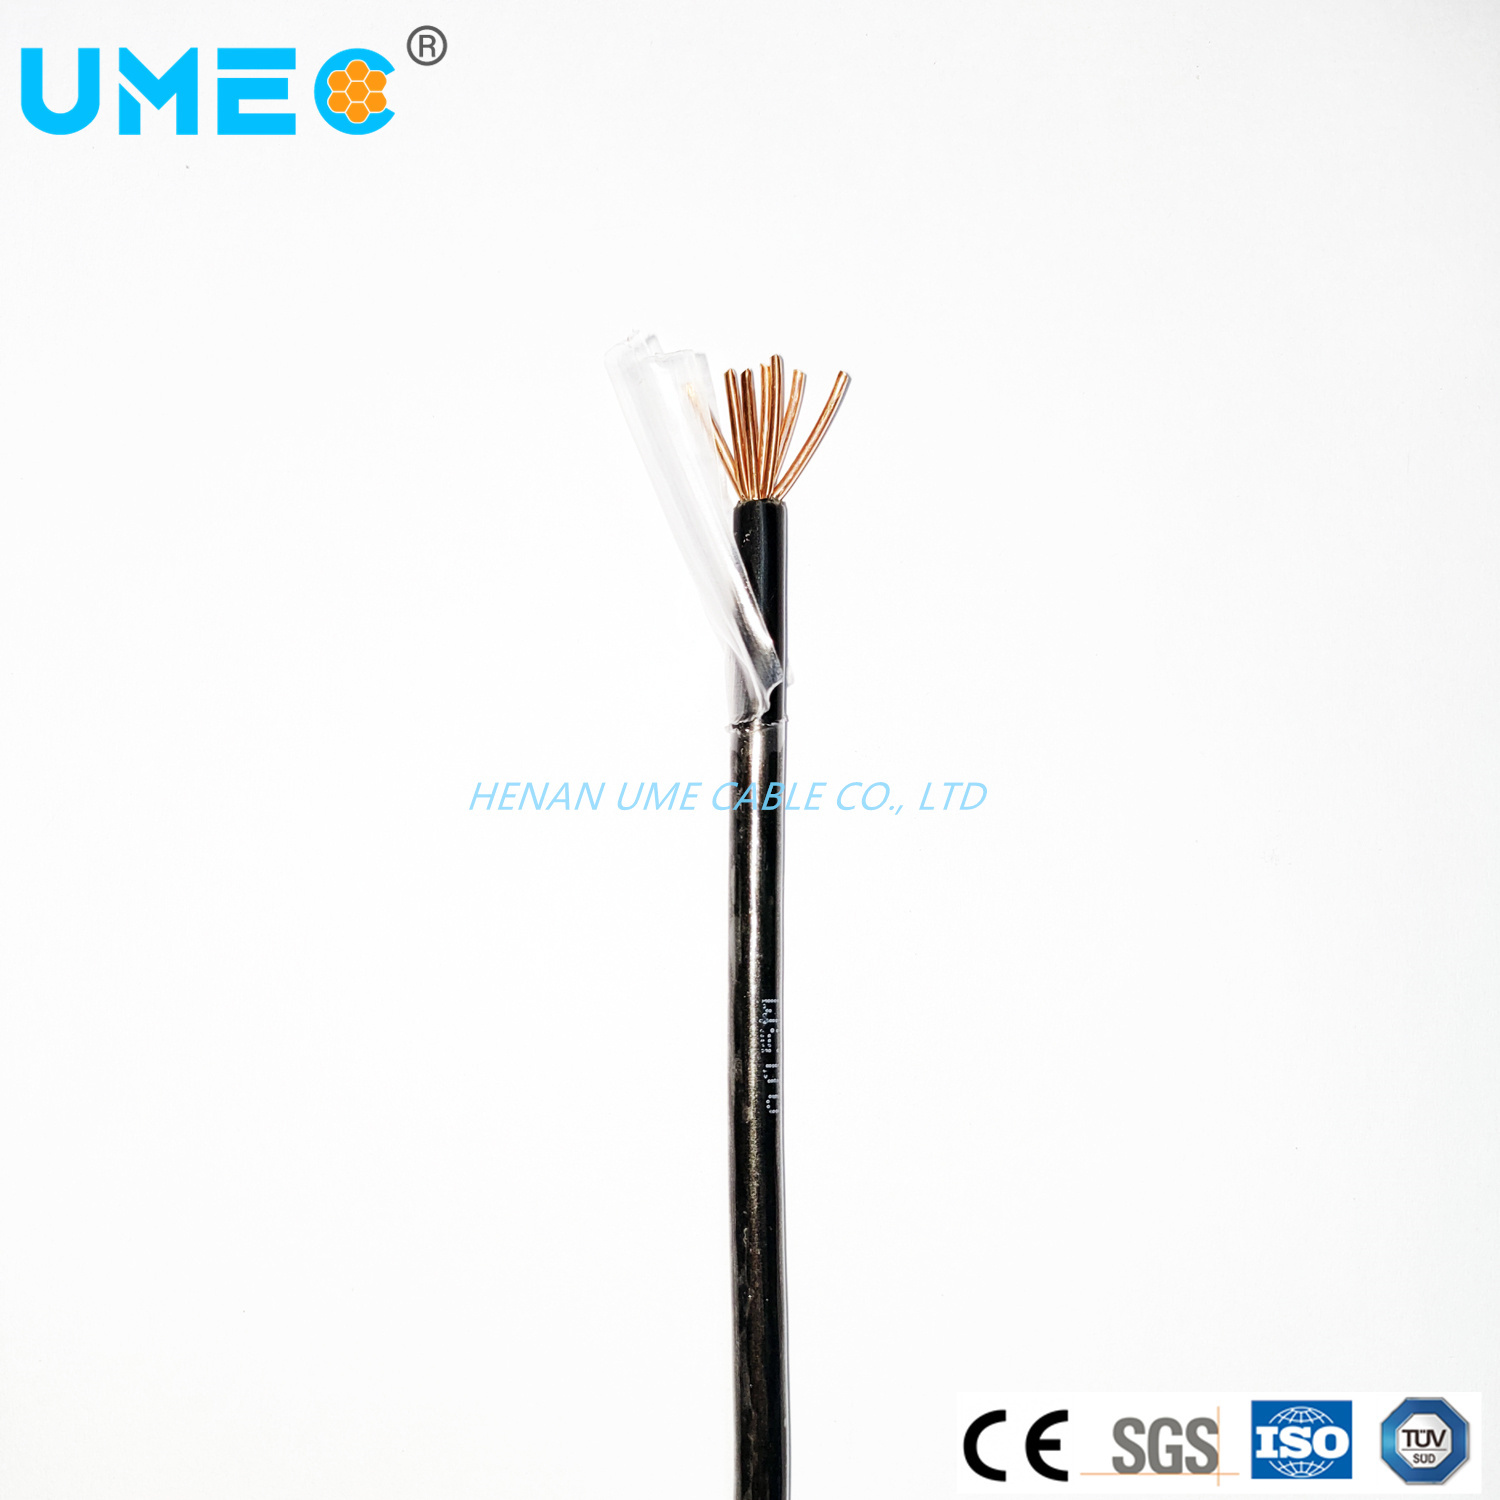 UL1316 Free Sample Thwn Thhn Wire 14 12 10 8 AWG Copper Conductor Electrical Nylon Cable